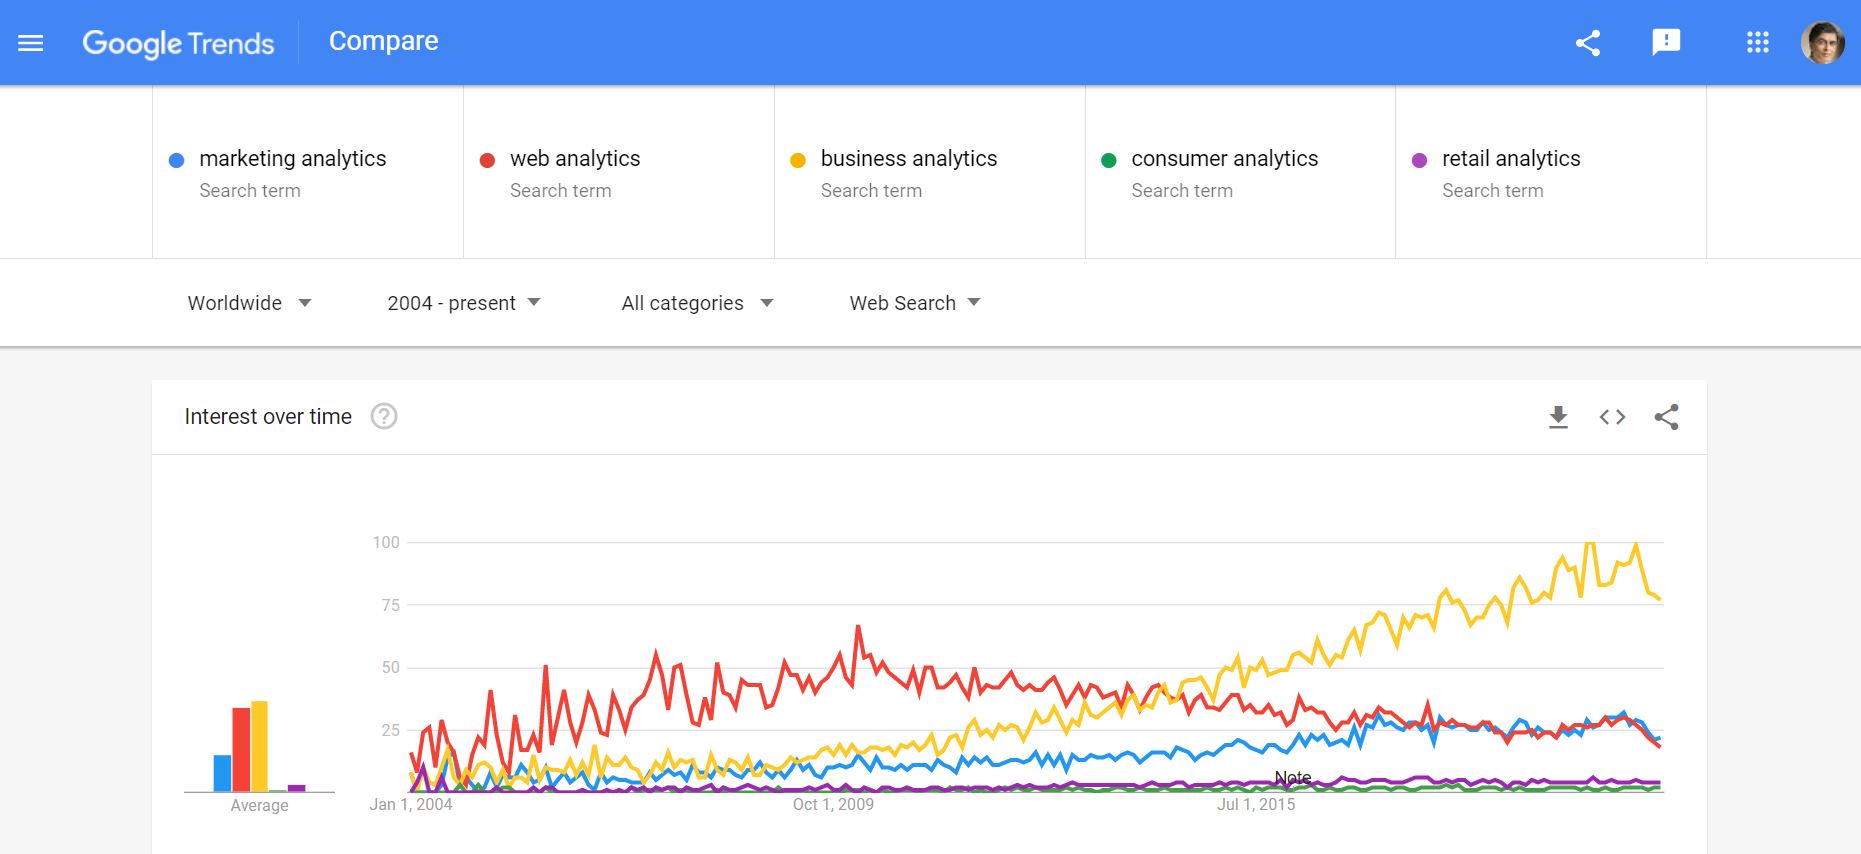 Google Trends reveals the growth/decline and the popularity (extent of usage) of keywords